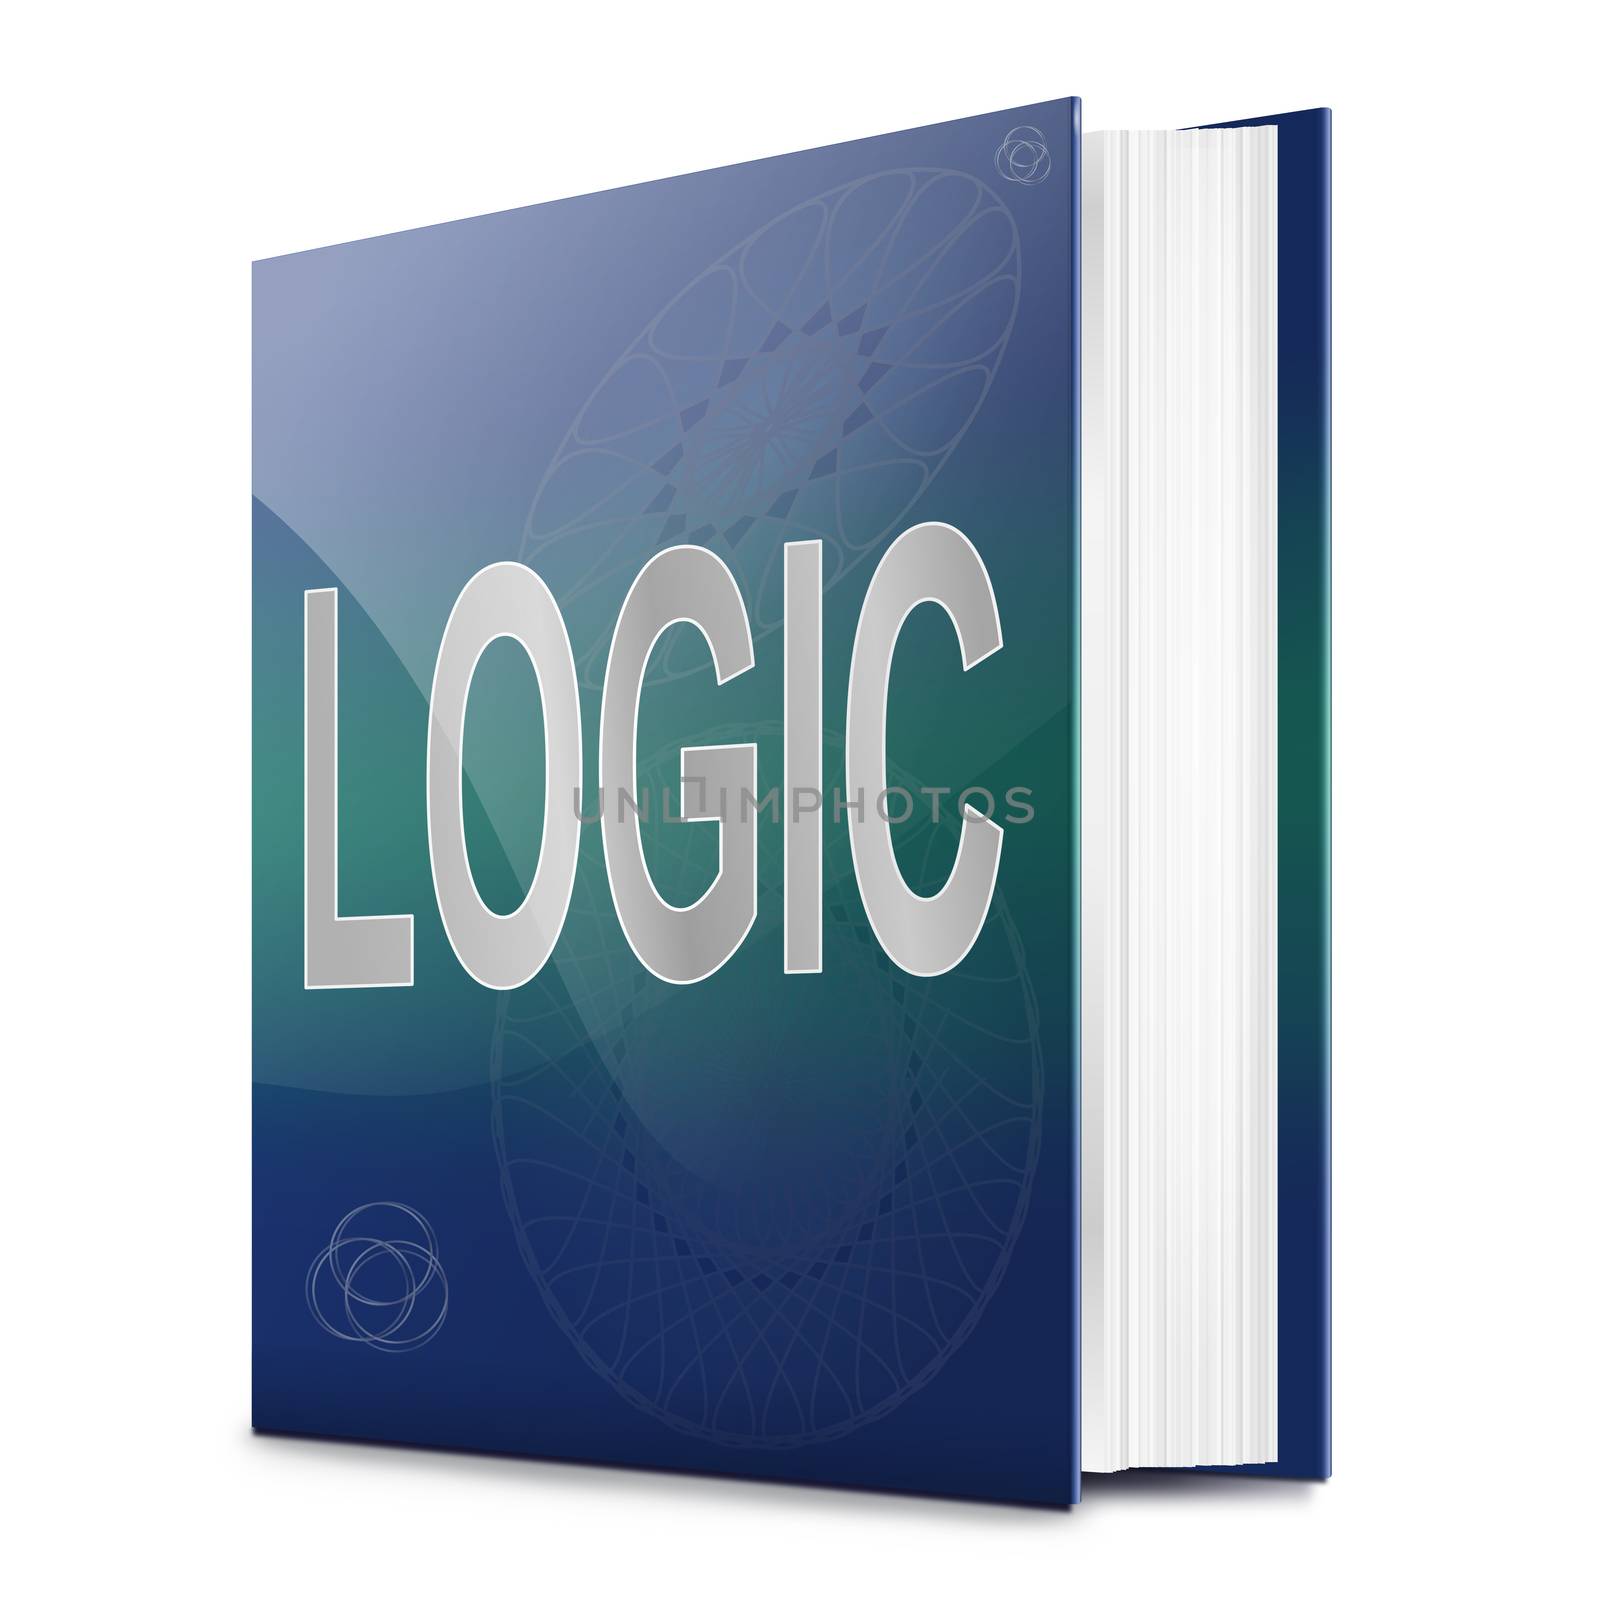 Illustration depicting a text book with a logic concept title. White background.